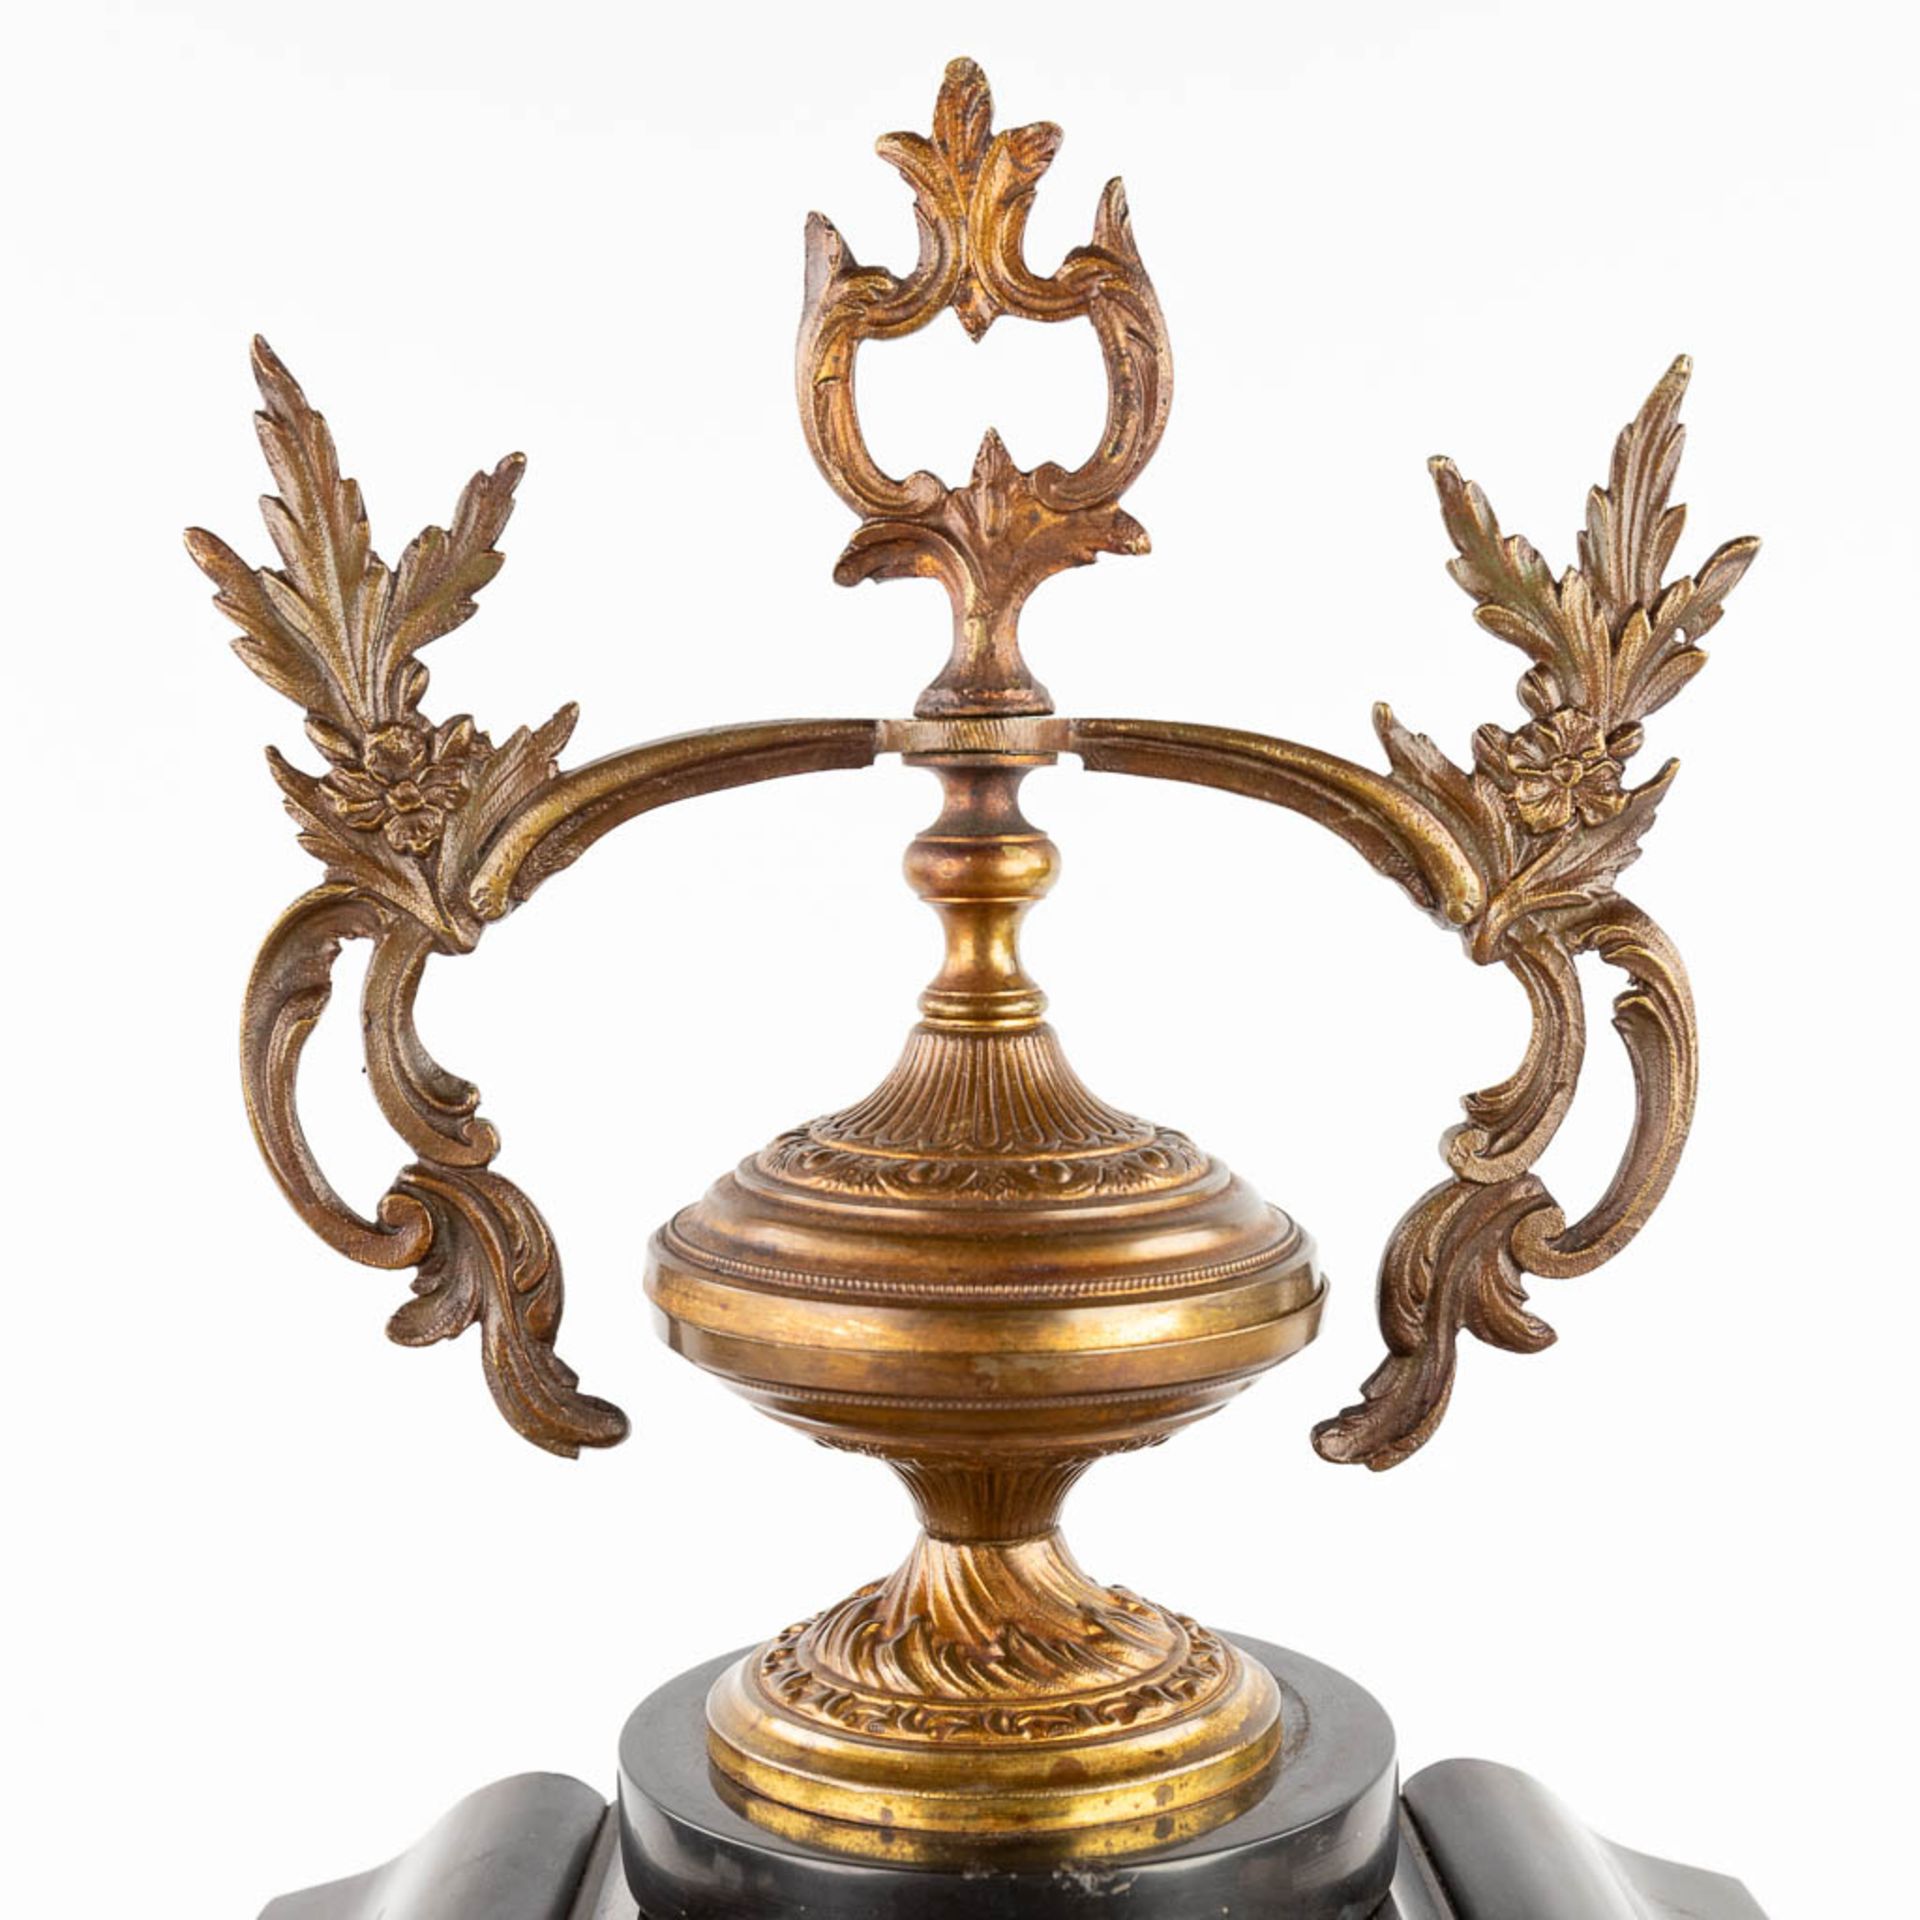 A three-piece mantle garniture, marble and bronze. Circa 1900. (L:16 x W:34 x H:59 cm) - Image 13 of 15